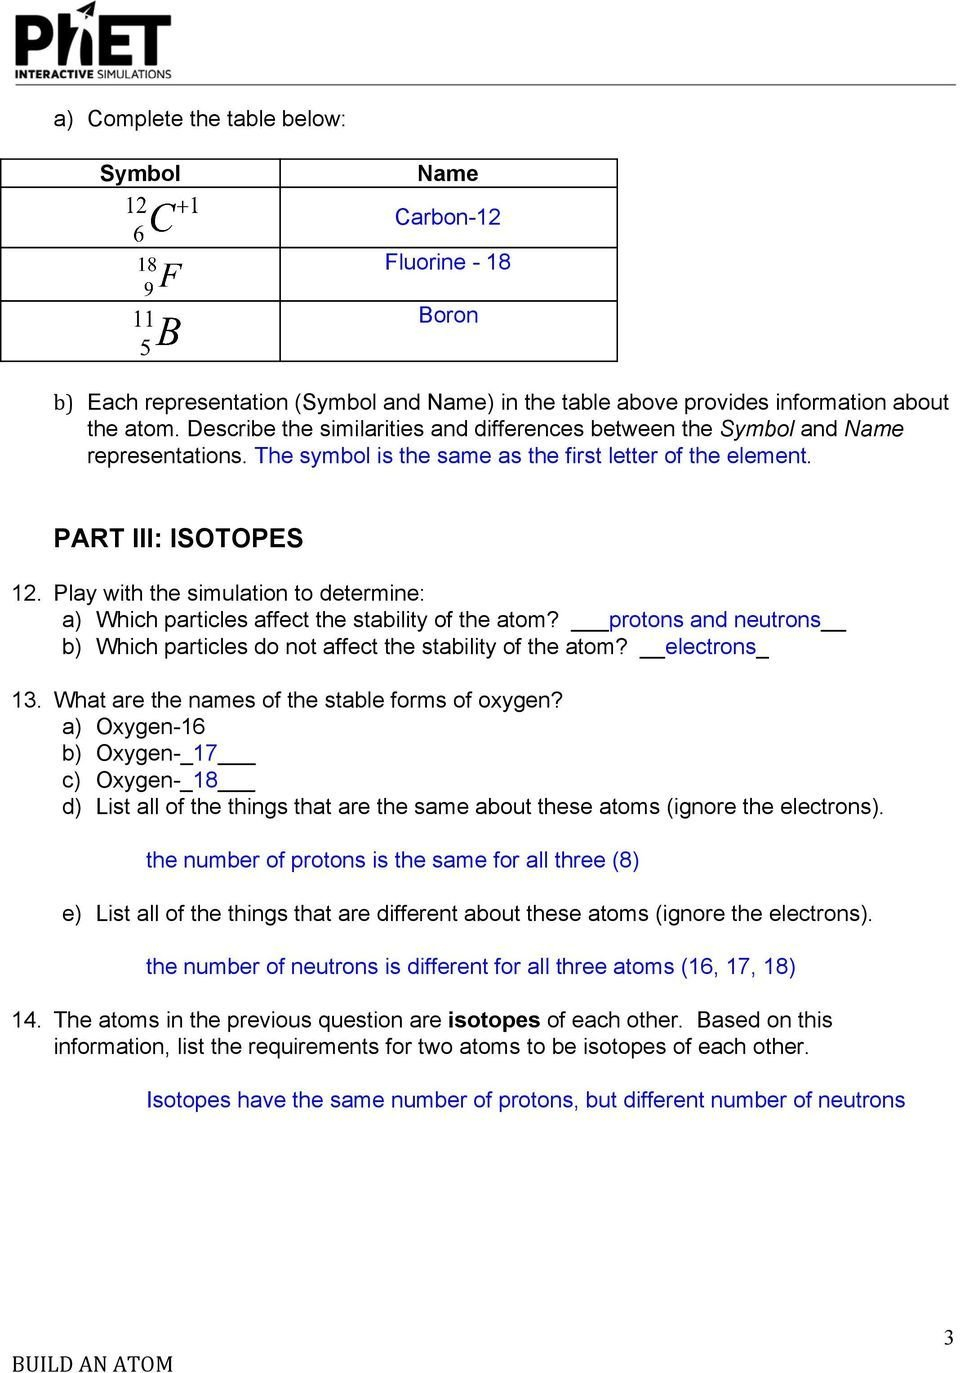 Charges Of Ions Worksheet Answer Key  Briefencounters Regarding Charges Of Ions Worksheet Answer Key